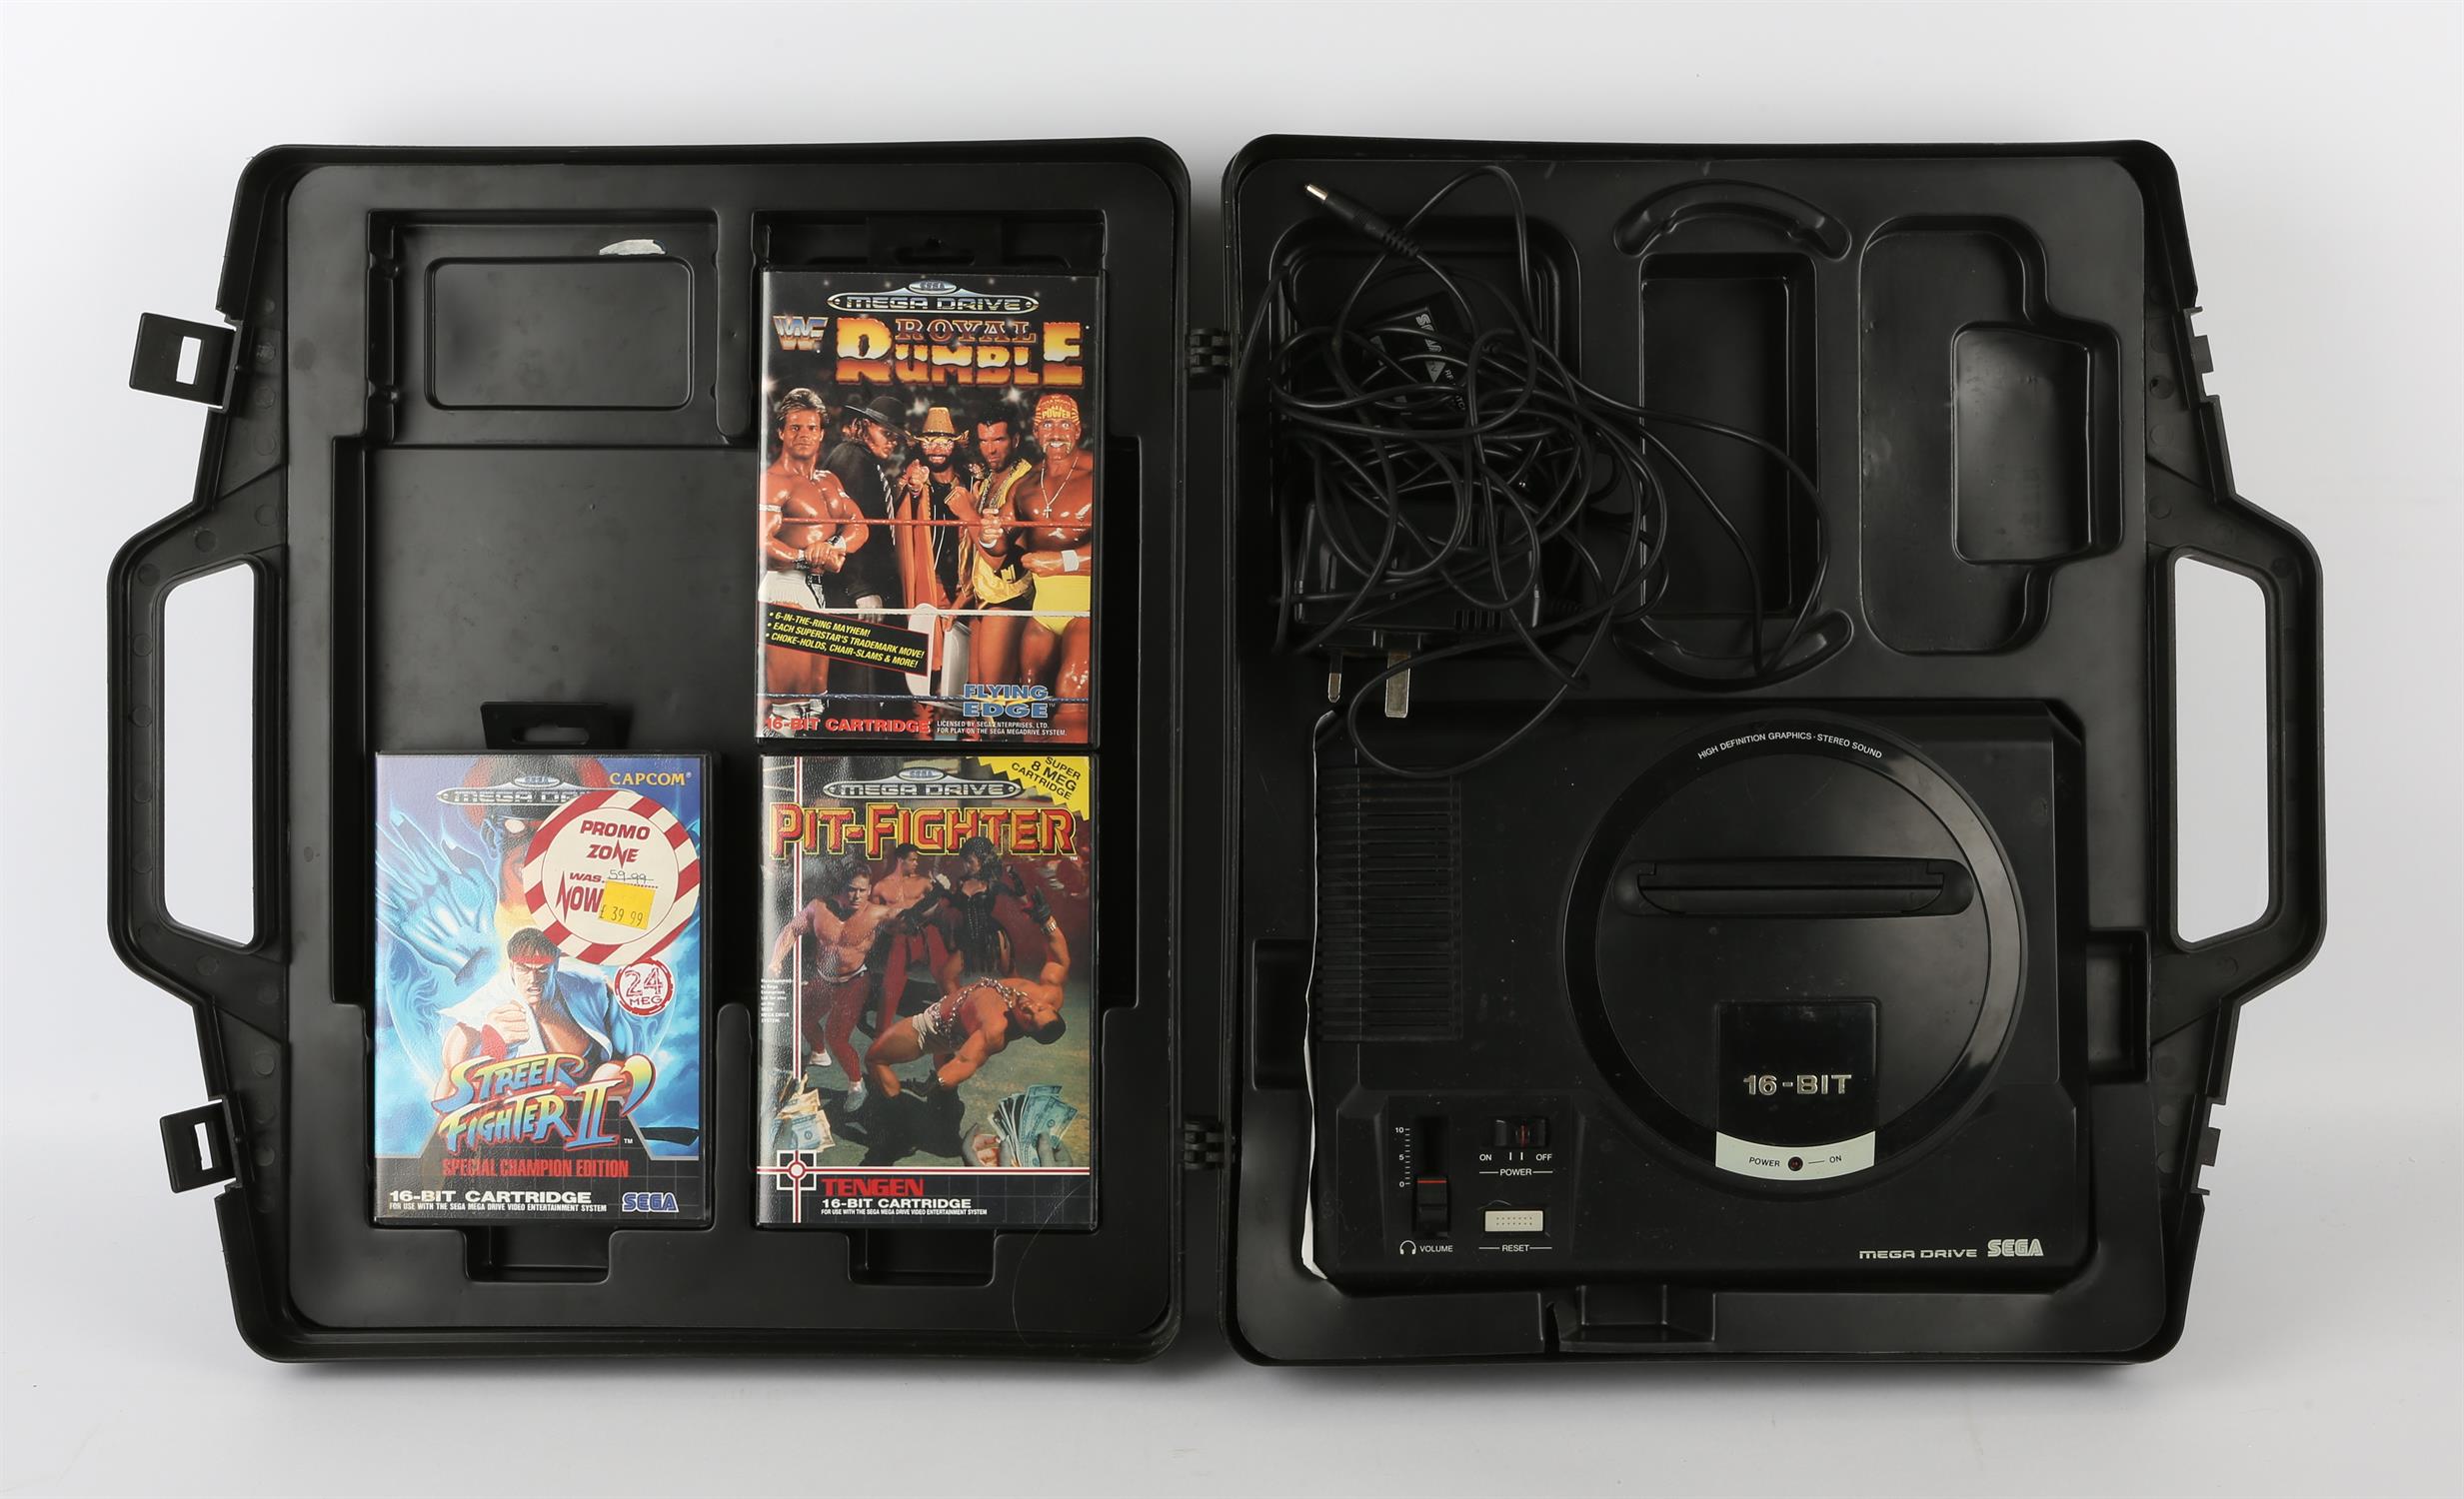 Sega Mega Drive [console only] with AC adapter and three games Games include: Street Fighter II: